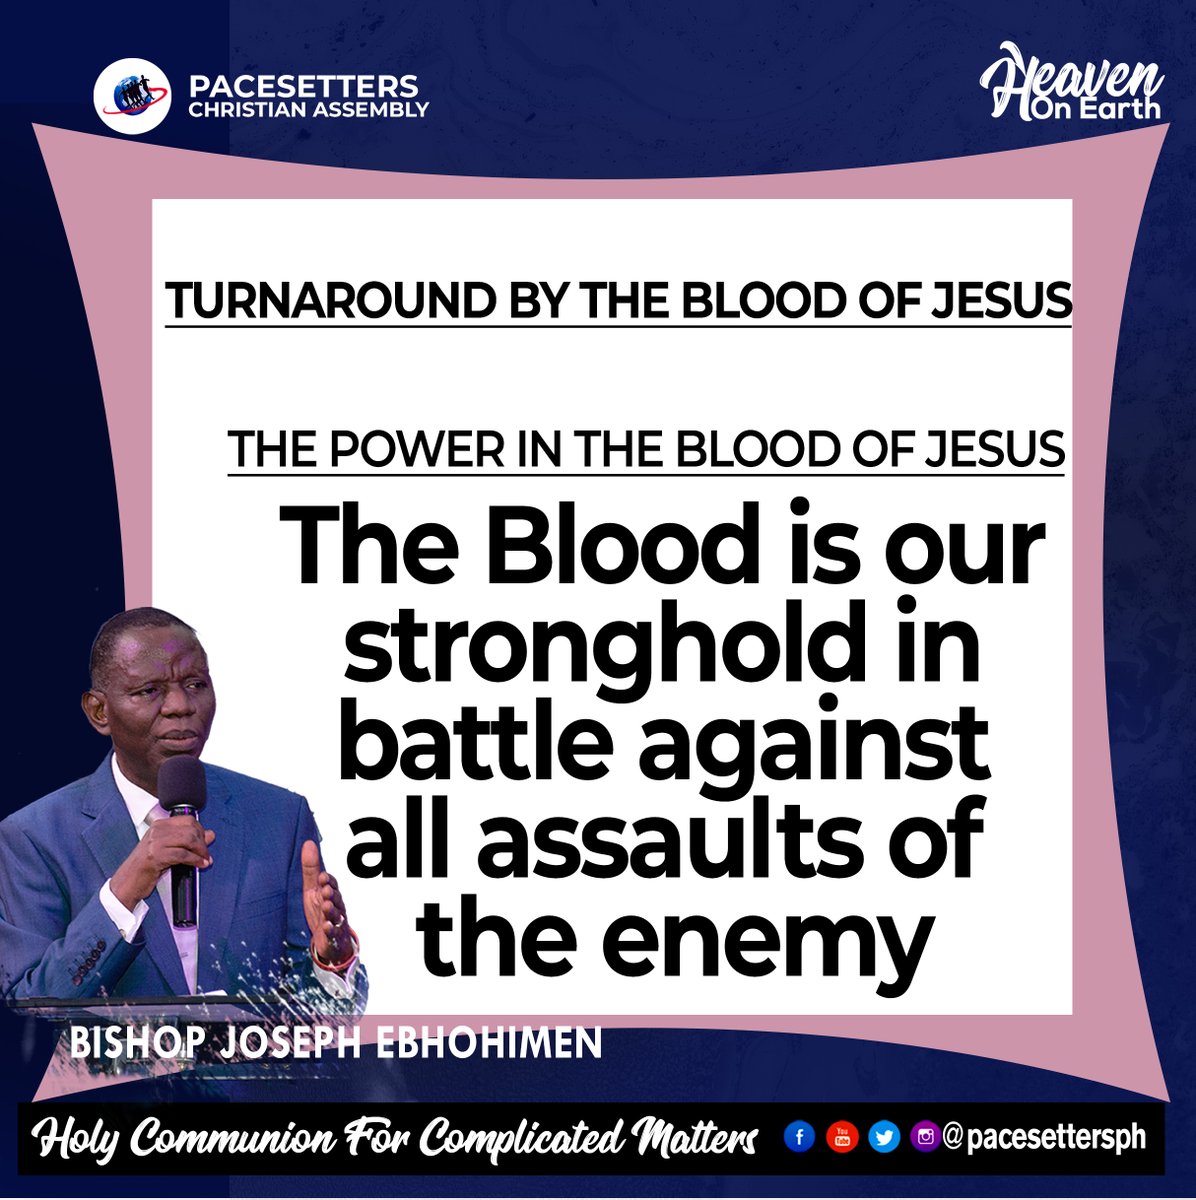 TURNAROUND BY THE BLOOD OF JESUS - THE POWER IN THE BLOOD OF JESUS

#TurnaroundbythebloodofJesus
#ThepowerinthebloodofJesus
#Holycommunionforcomplicatedmatters
#EndofmonththanksgivingService
#Plantedbythewaters
#Heavenonearth
#Pacesettersph